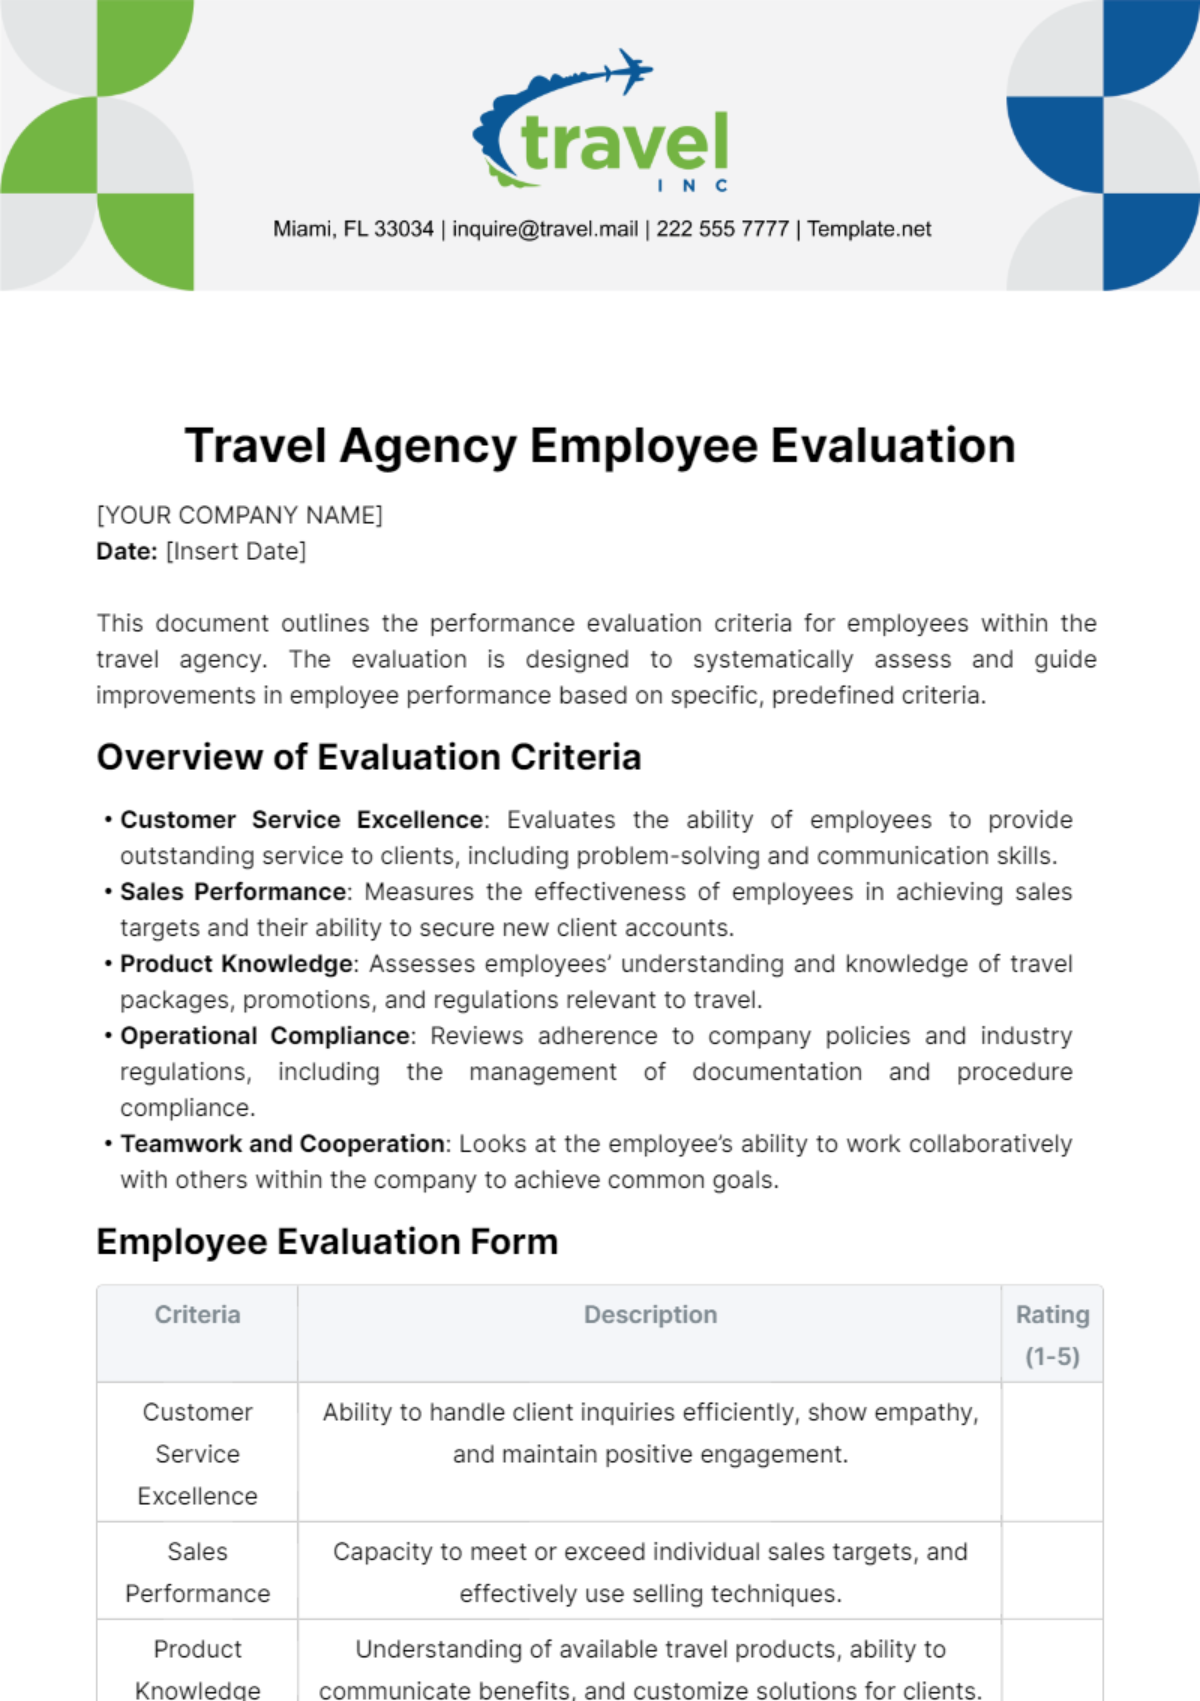 Travel Agency Employee Evaluation Template